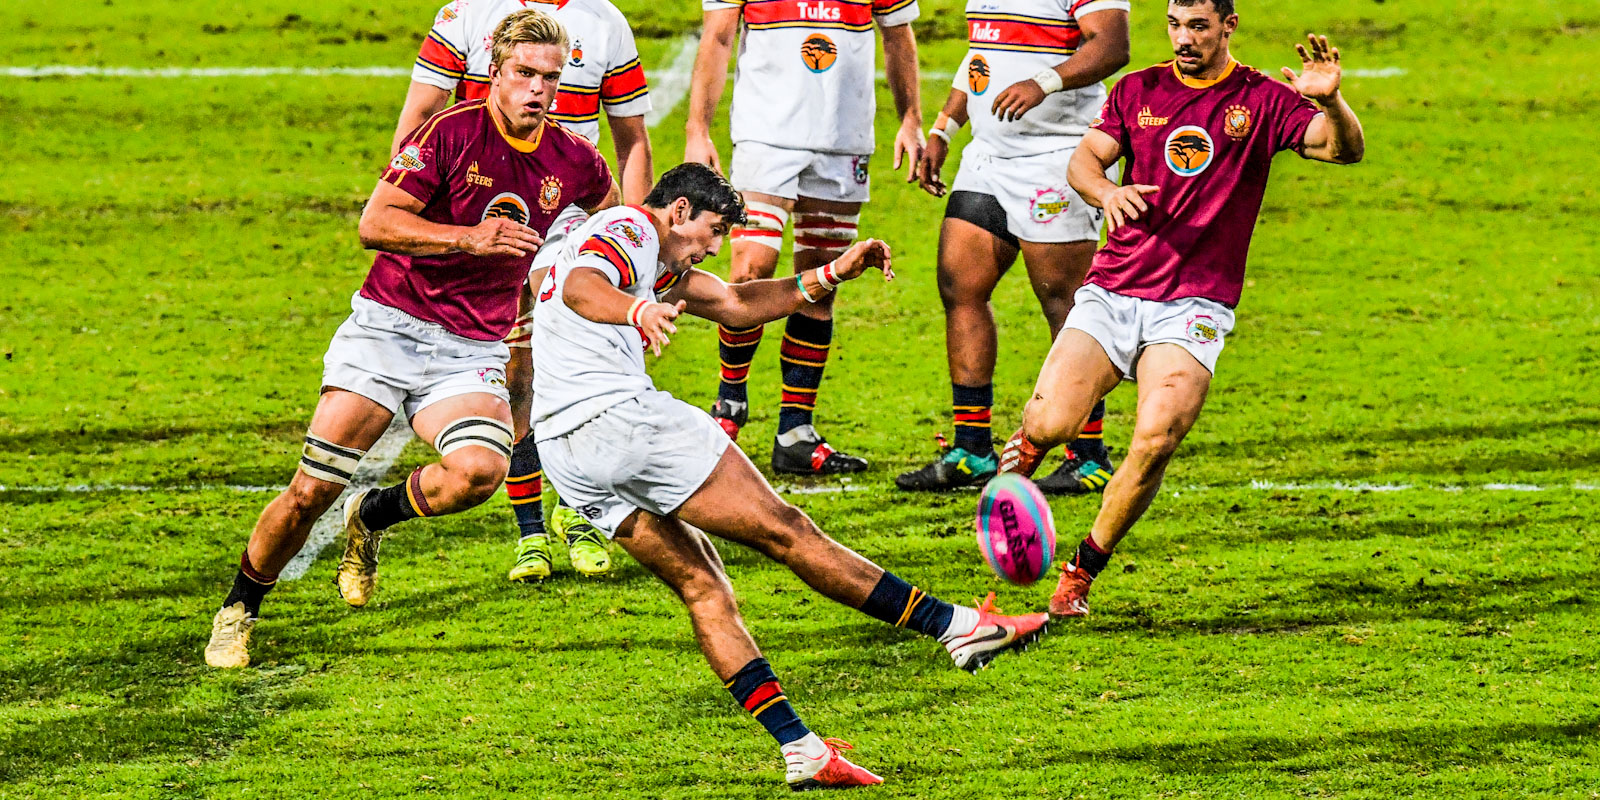 Zander du Plessis re-wrote the FNB Varsity Cup record books on Friday.